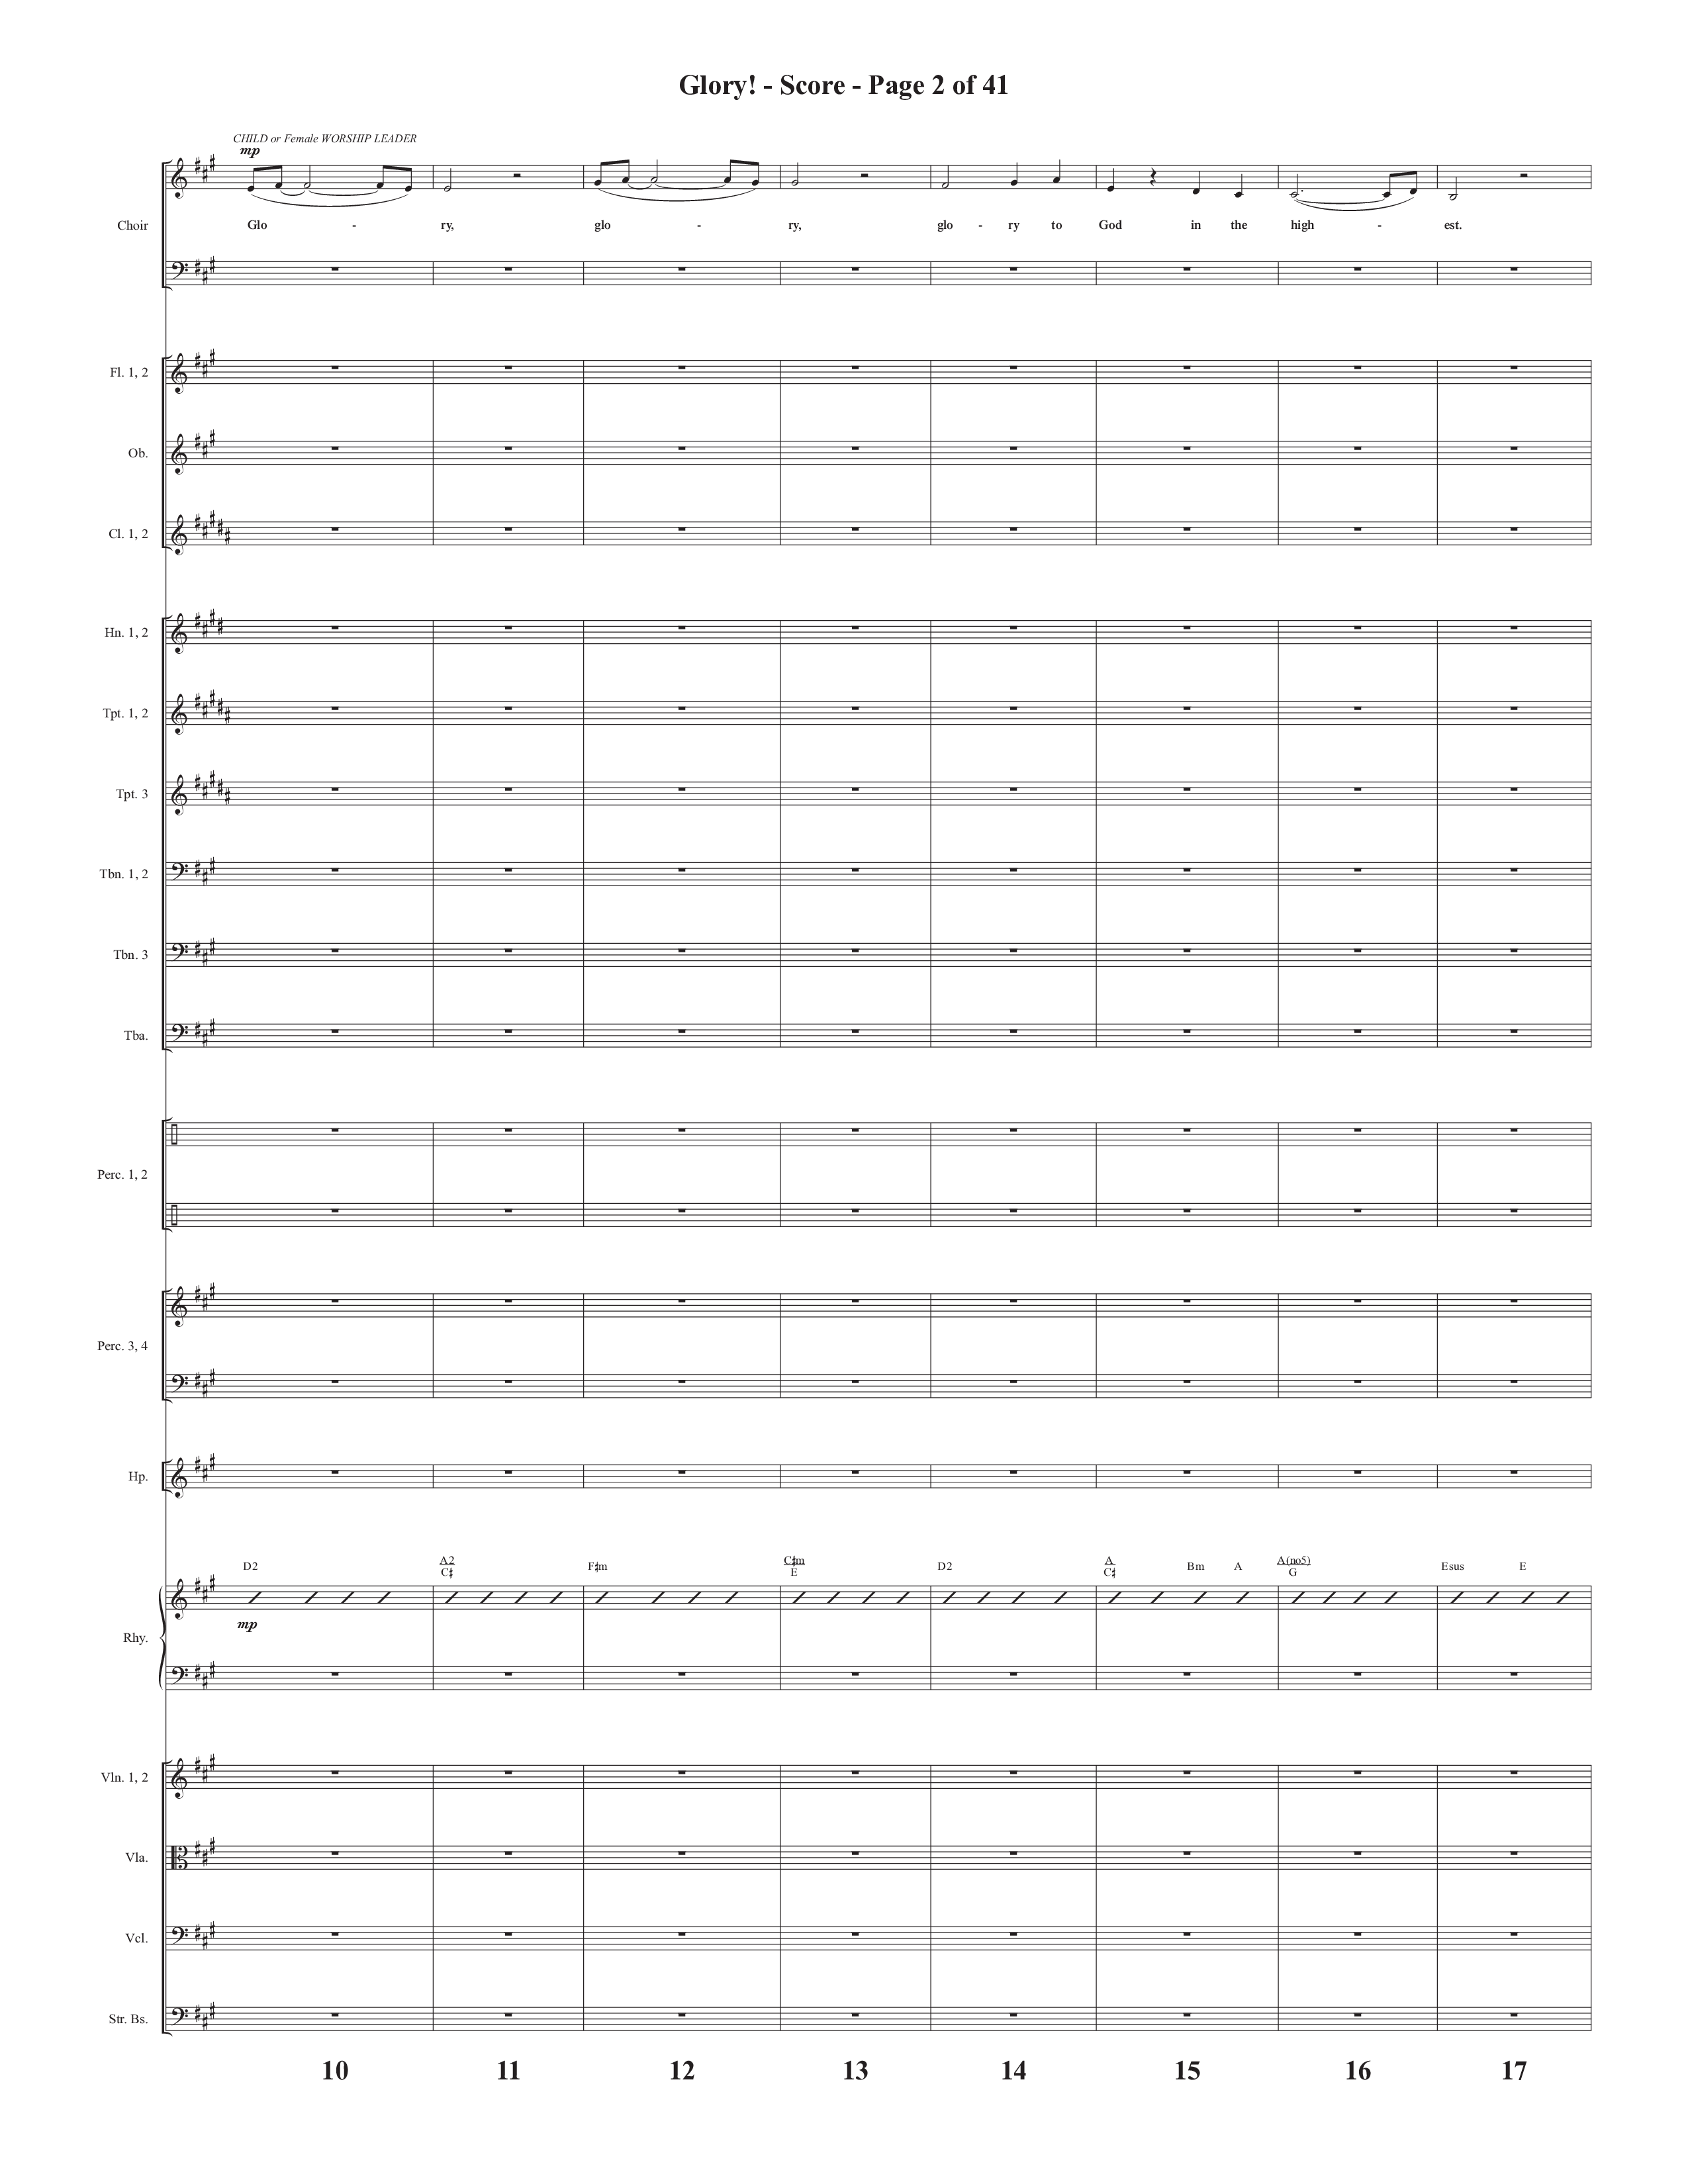 Glory: A Christmas Worship Experience (Choral Anthem SATB) Orchestration (Semsen Music / Arr. John Bolin / Orch. Cliff Duren)